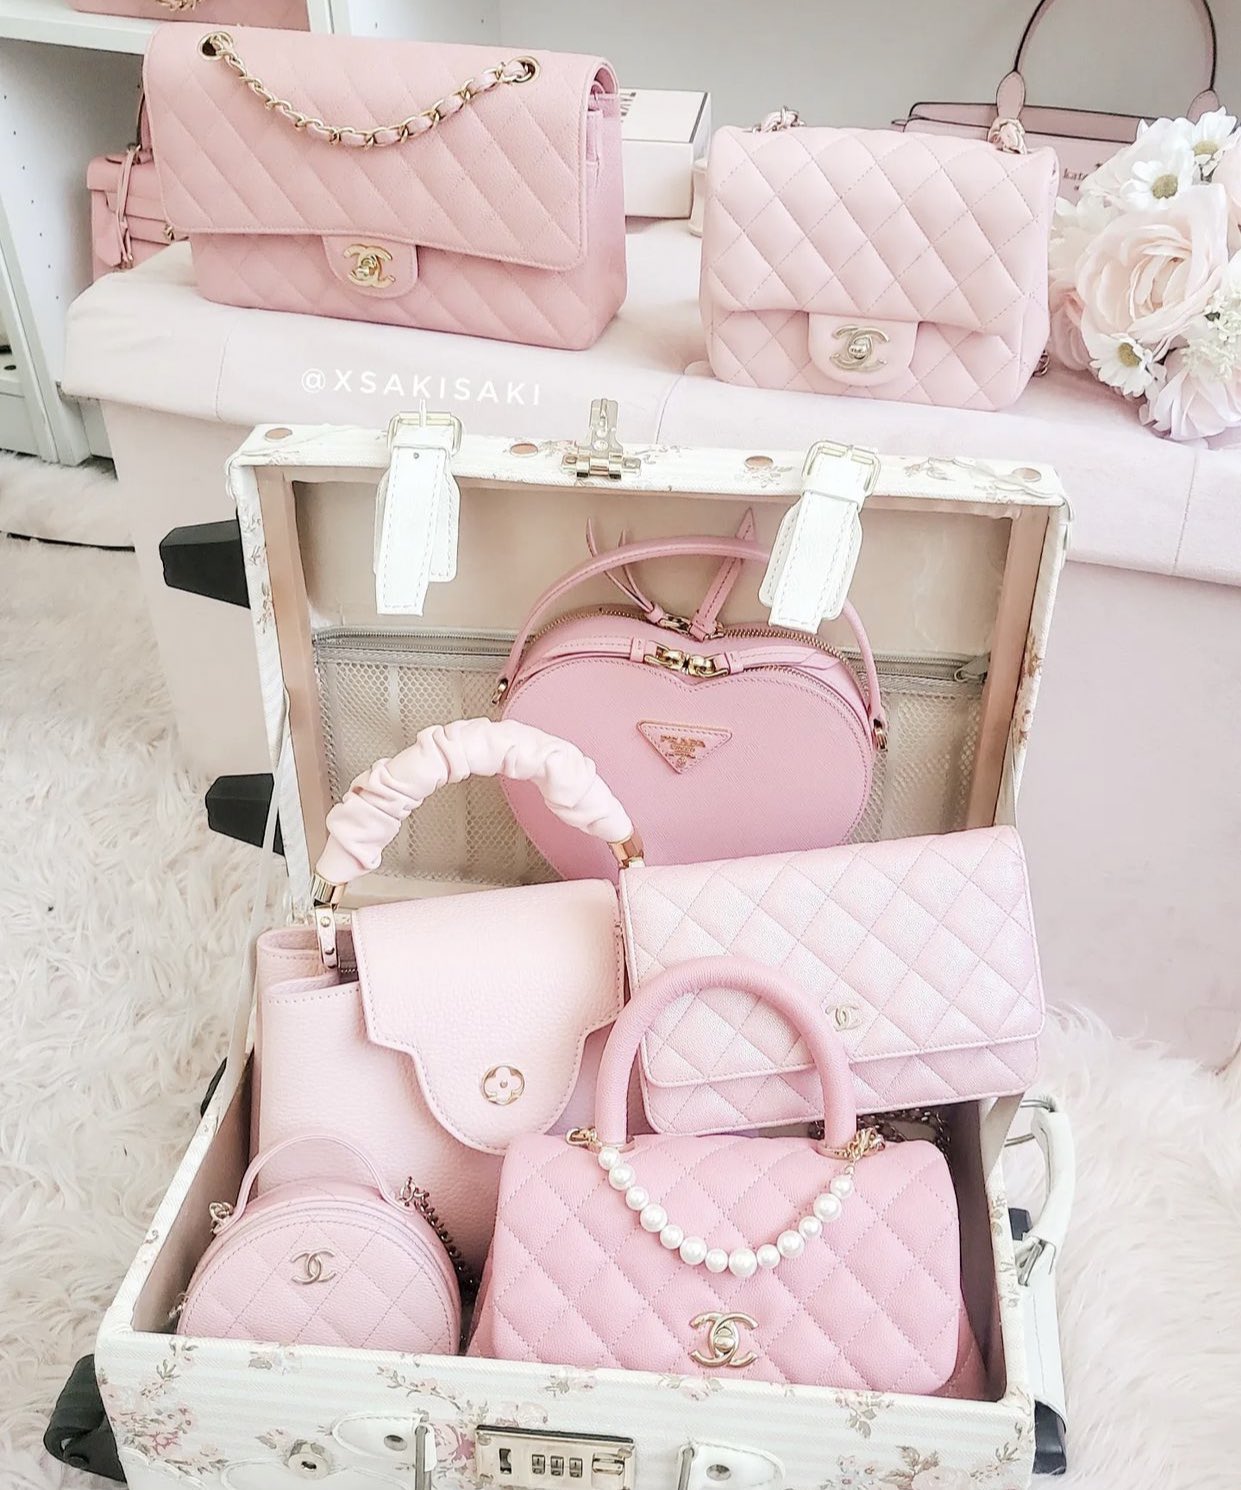 m ✨ on X: the perfect pink bag collection